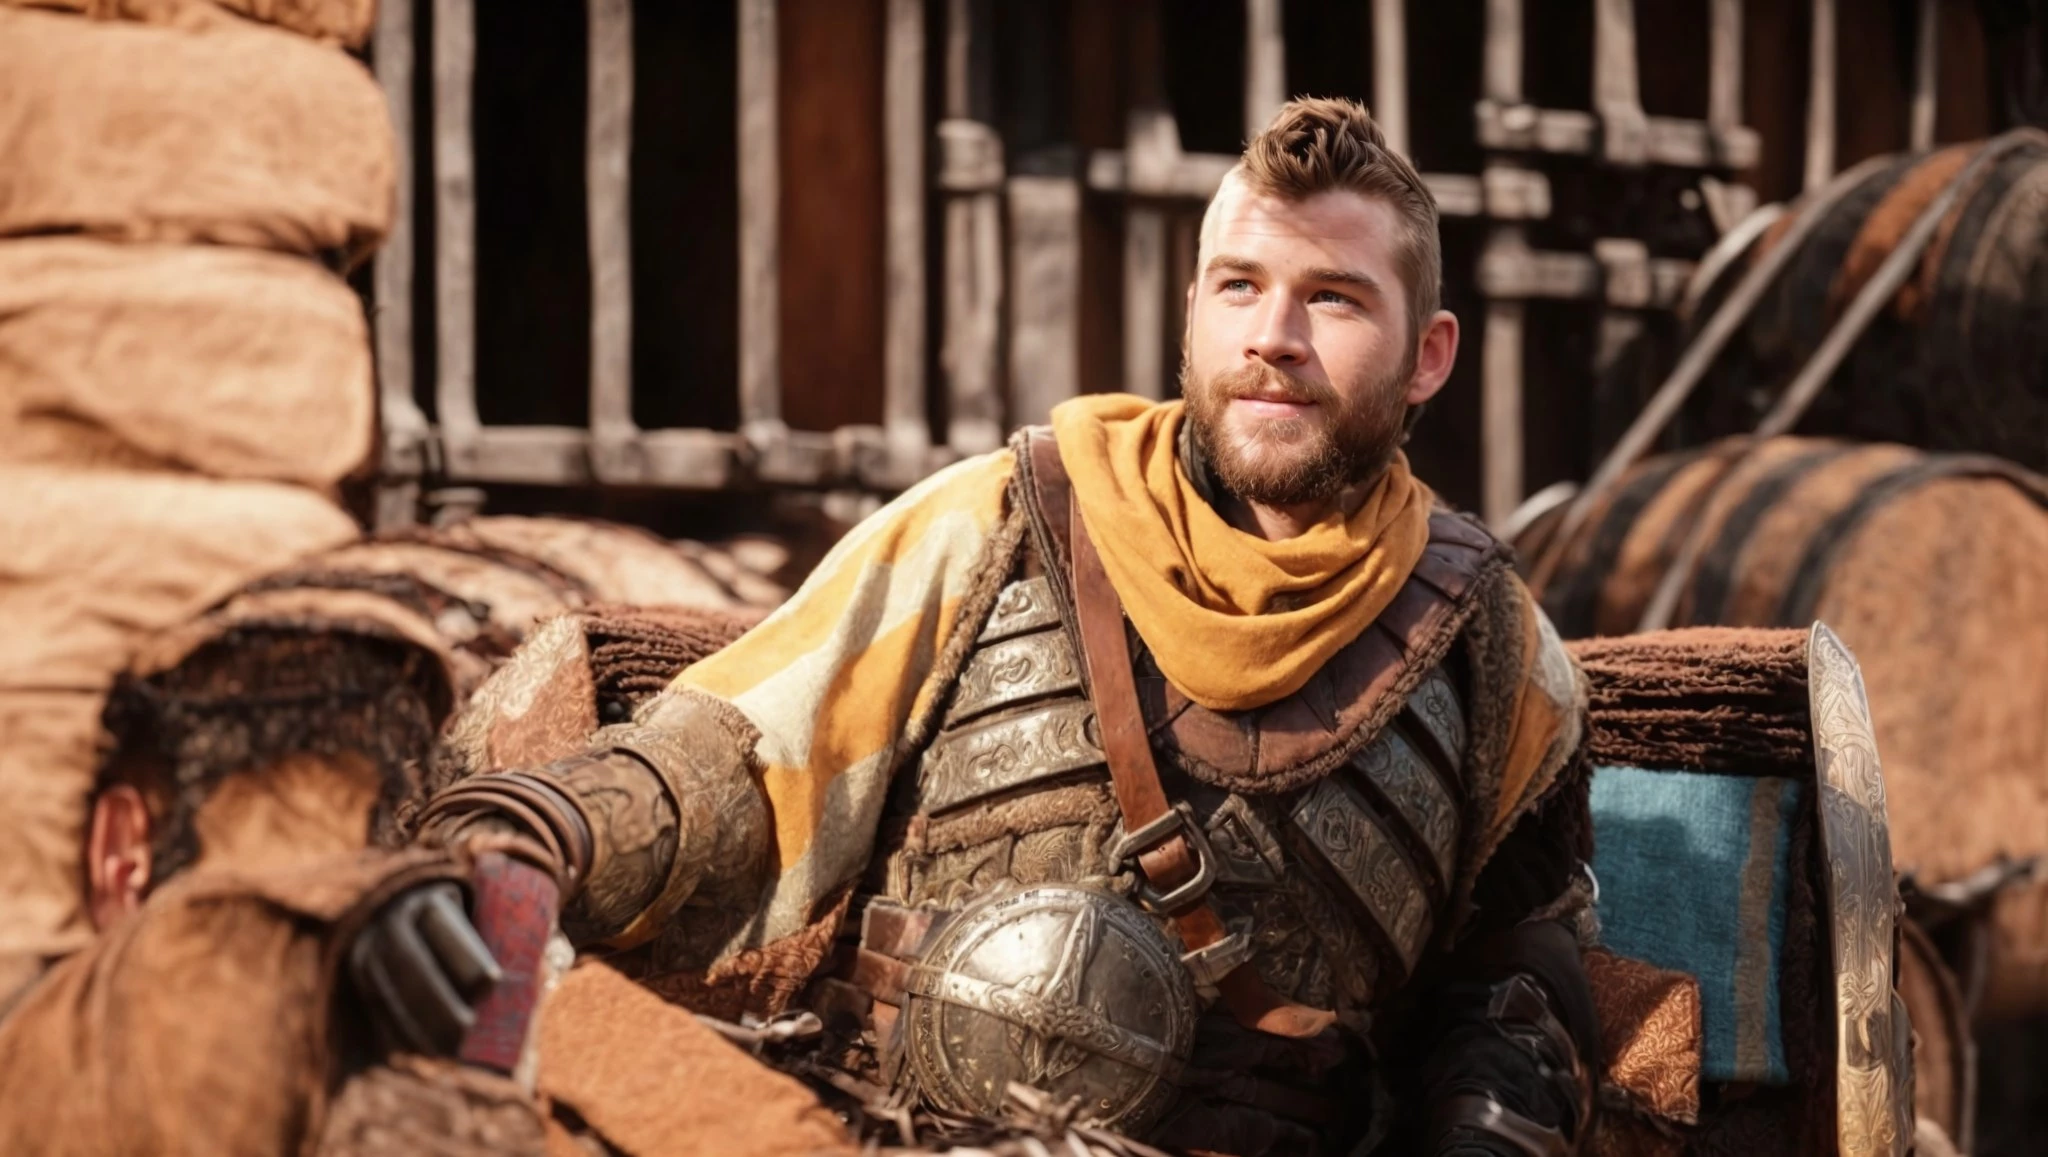 The Hunger Games Star Liam Hemsworth Is Picked To Be Erend, One Of Aloy’s Most Trusted Allies